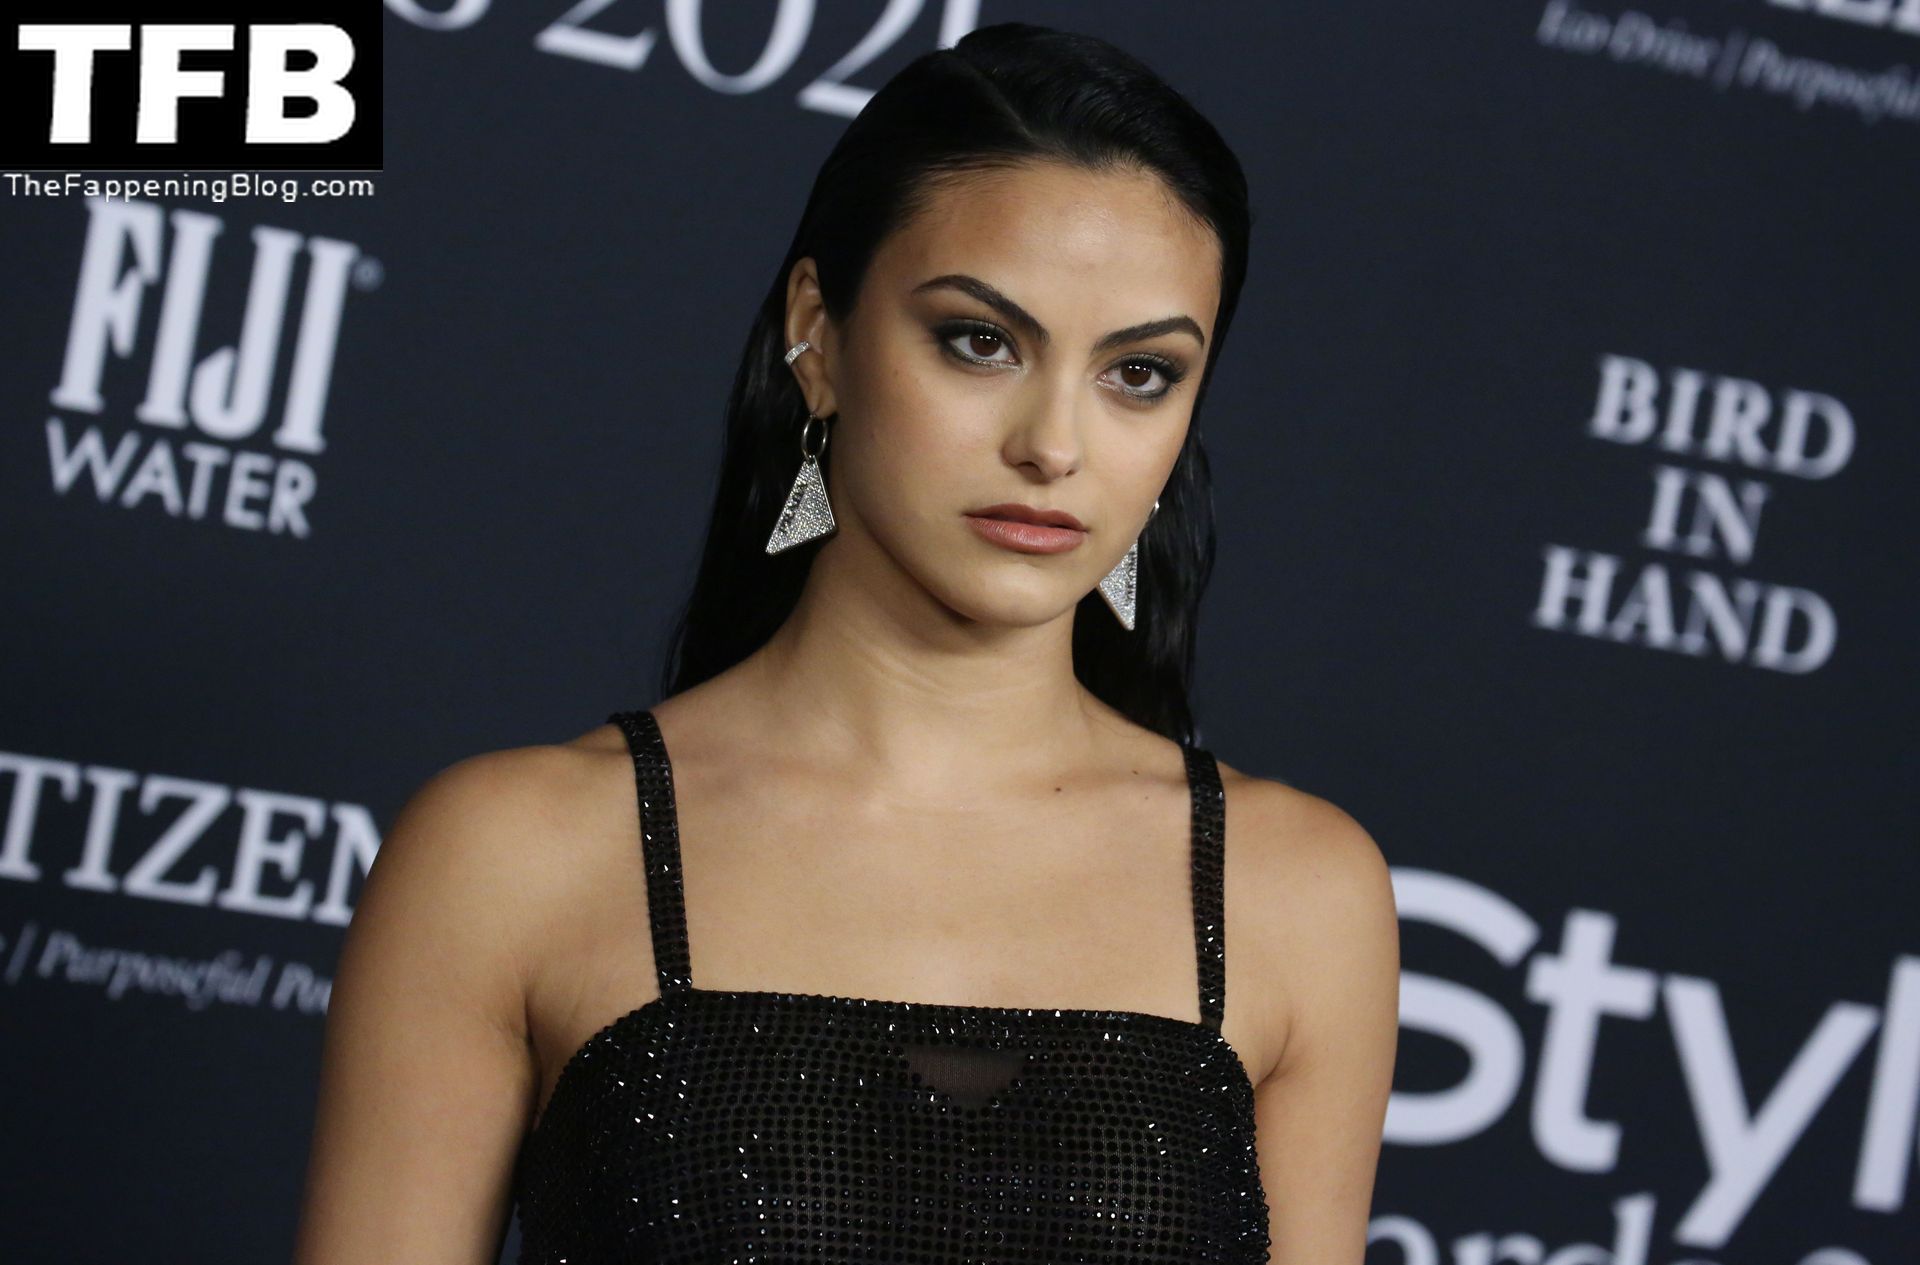 Camila-Mendes-See-Through-Tits-The-Fappening-Blog-88.jpg